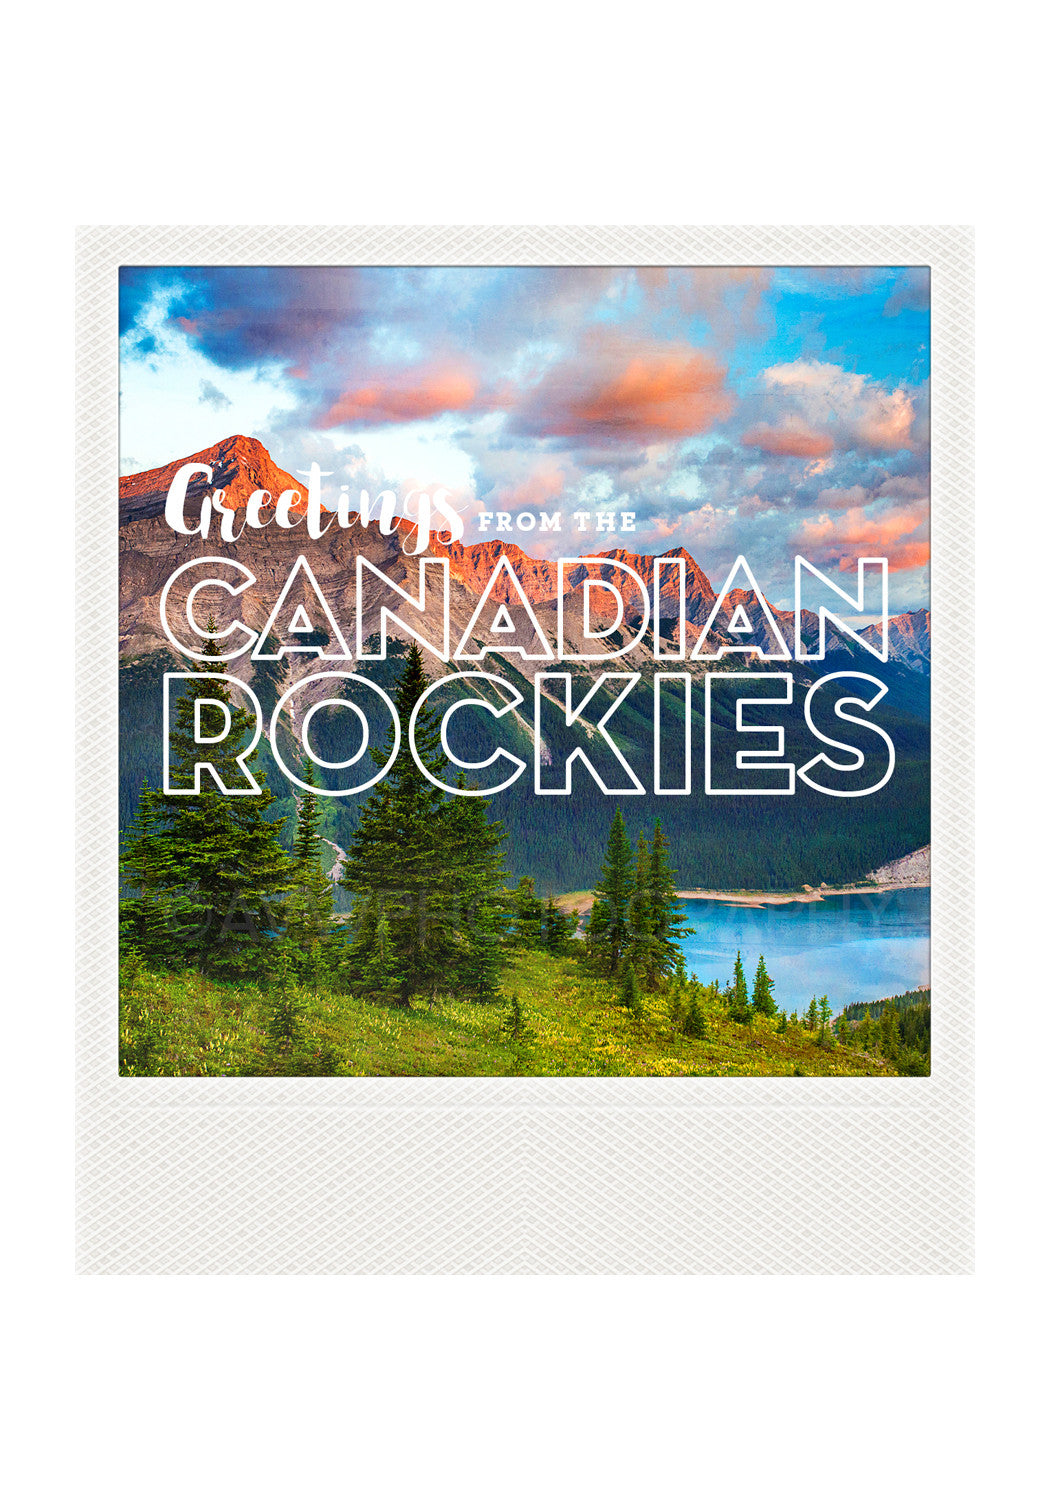 Metallic Polaroid Magnet <br> Greetings from the Canadian Rockies <br> Kananaskis Country